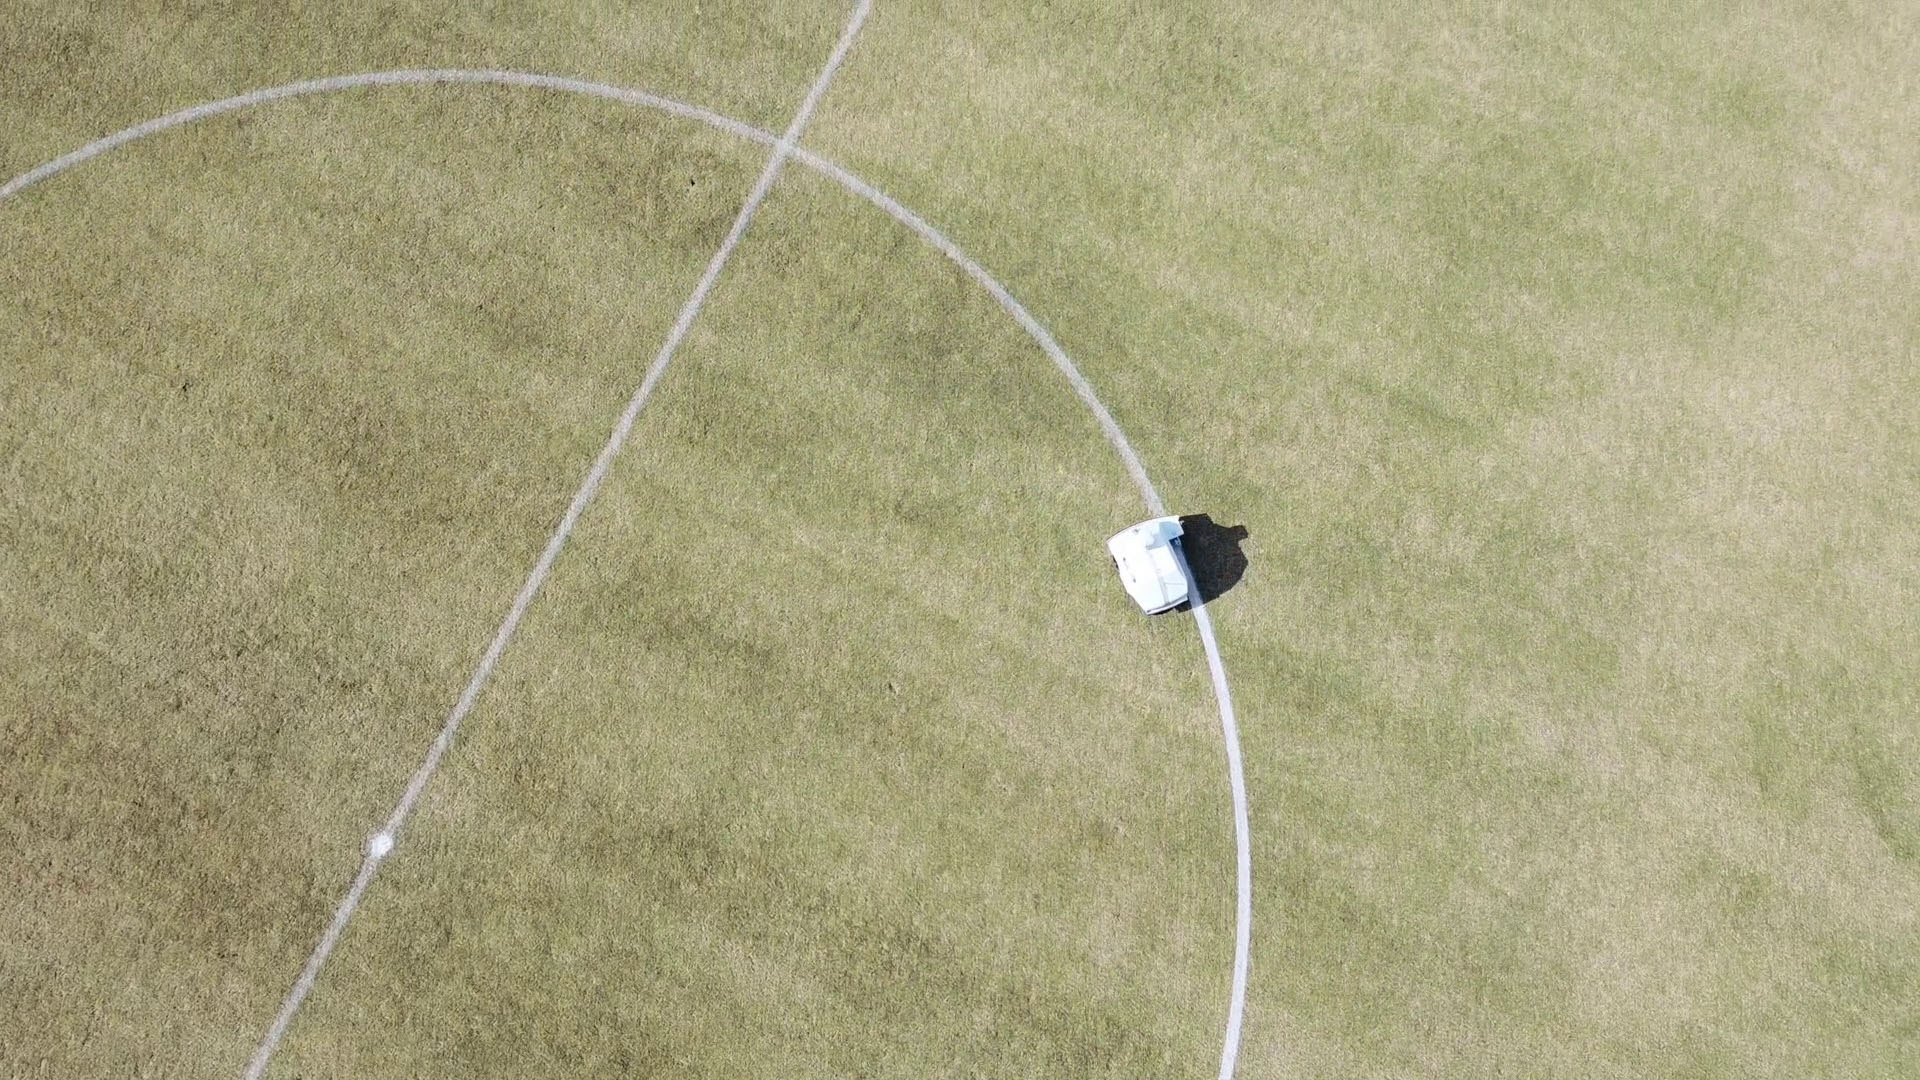 Miracosta turf tank robot painting a mid circle on a soccer field